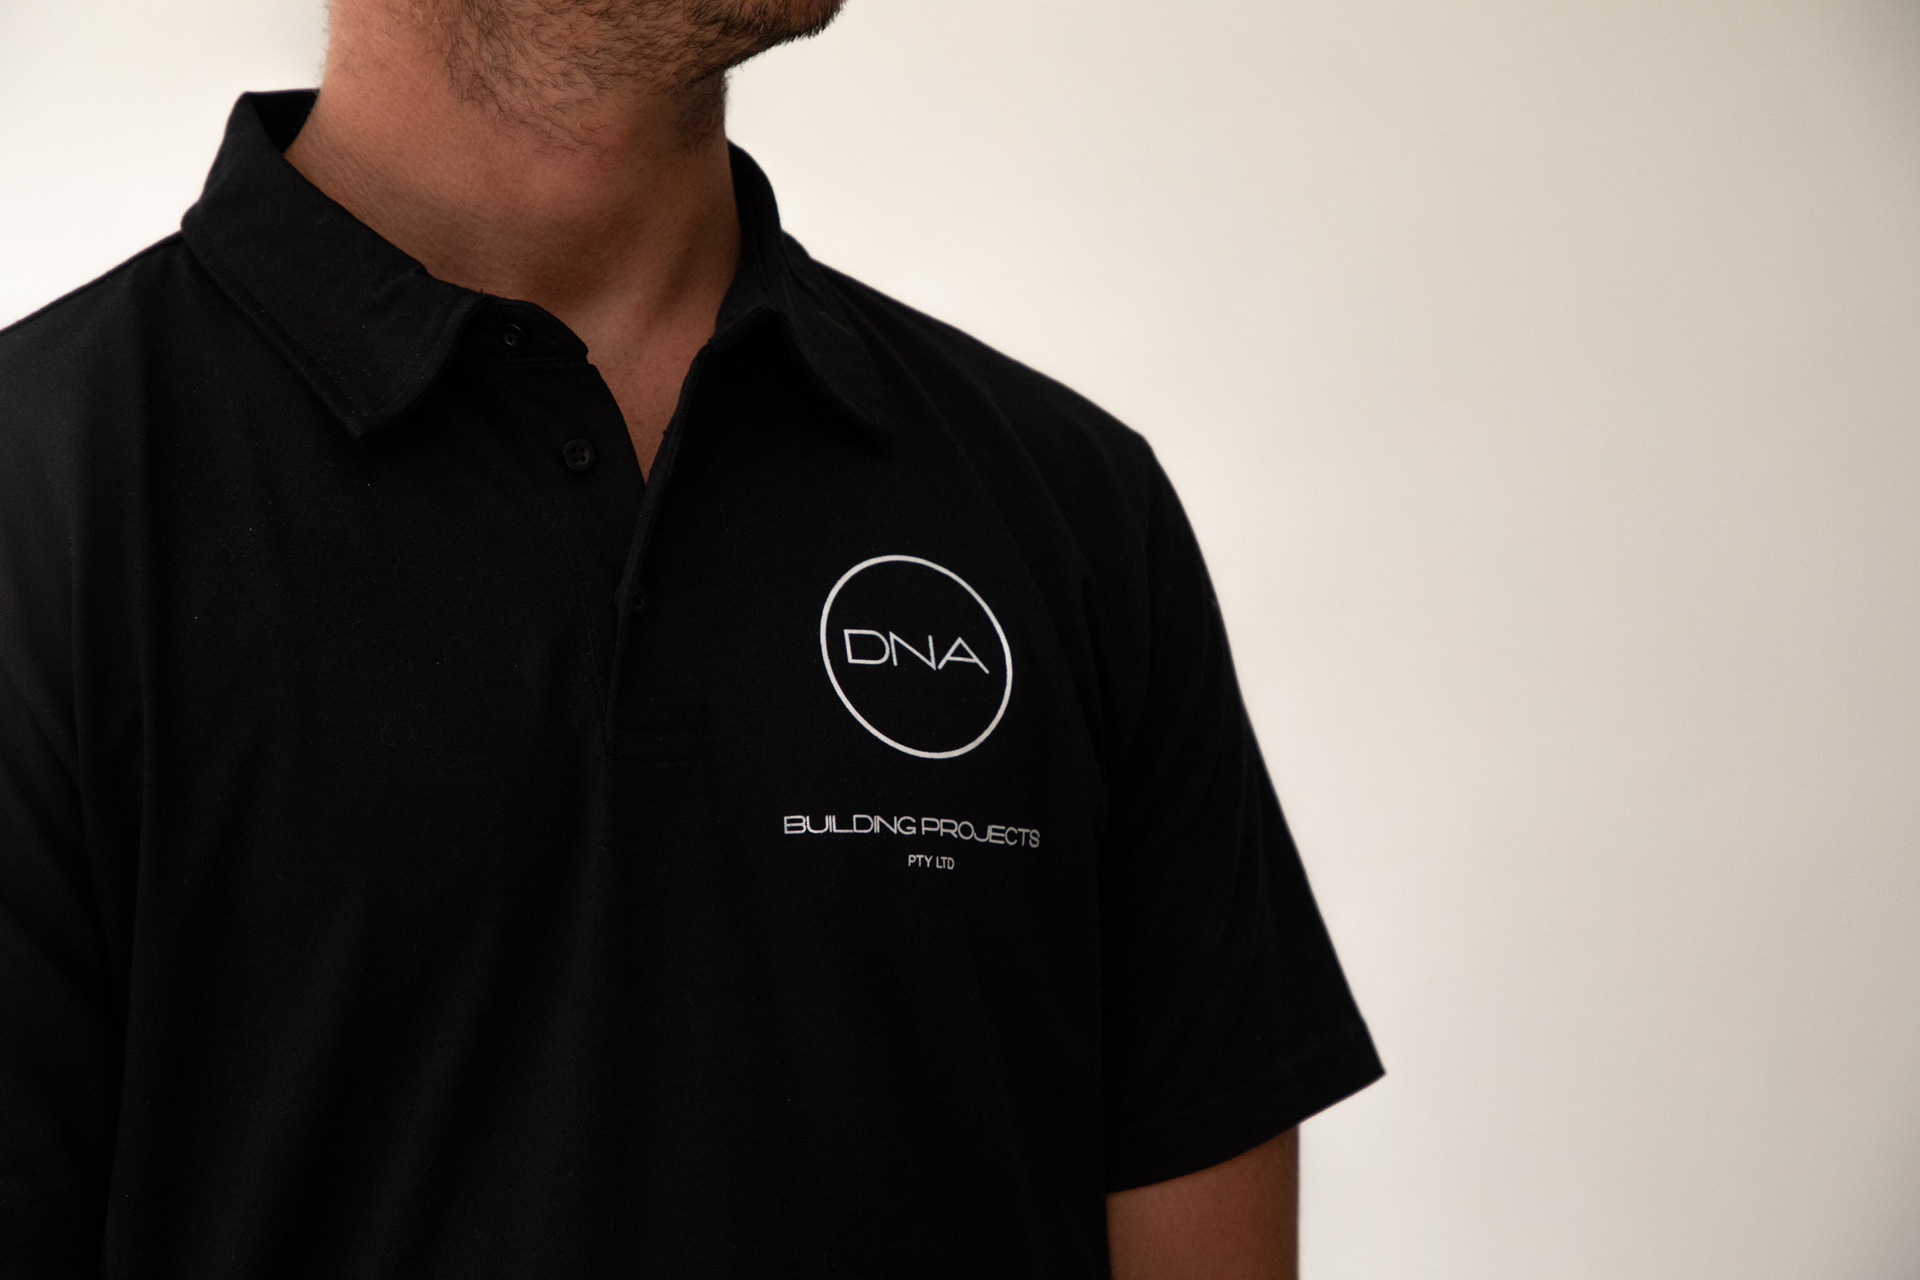 DNA building projects logo on a black tshirt